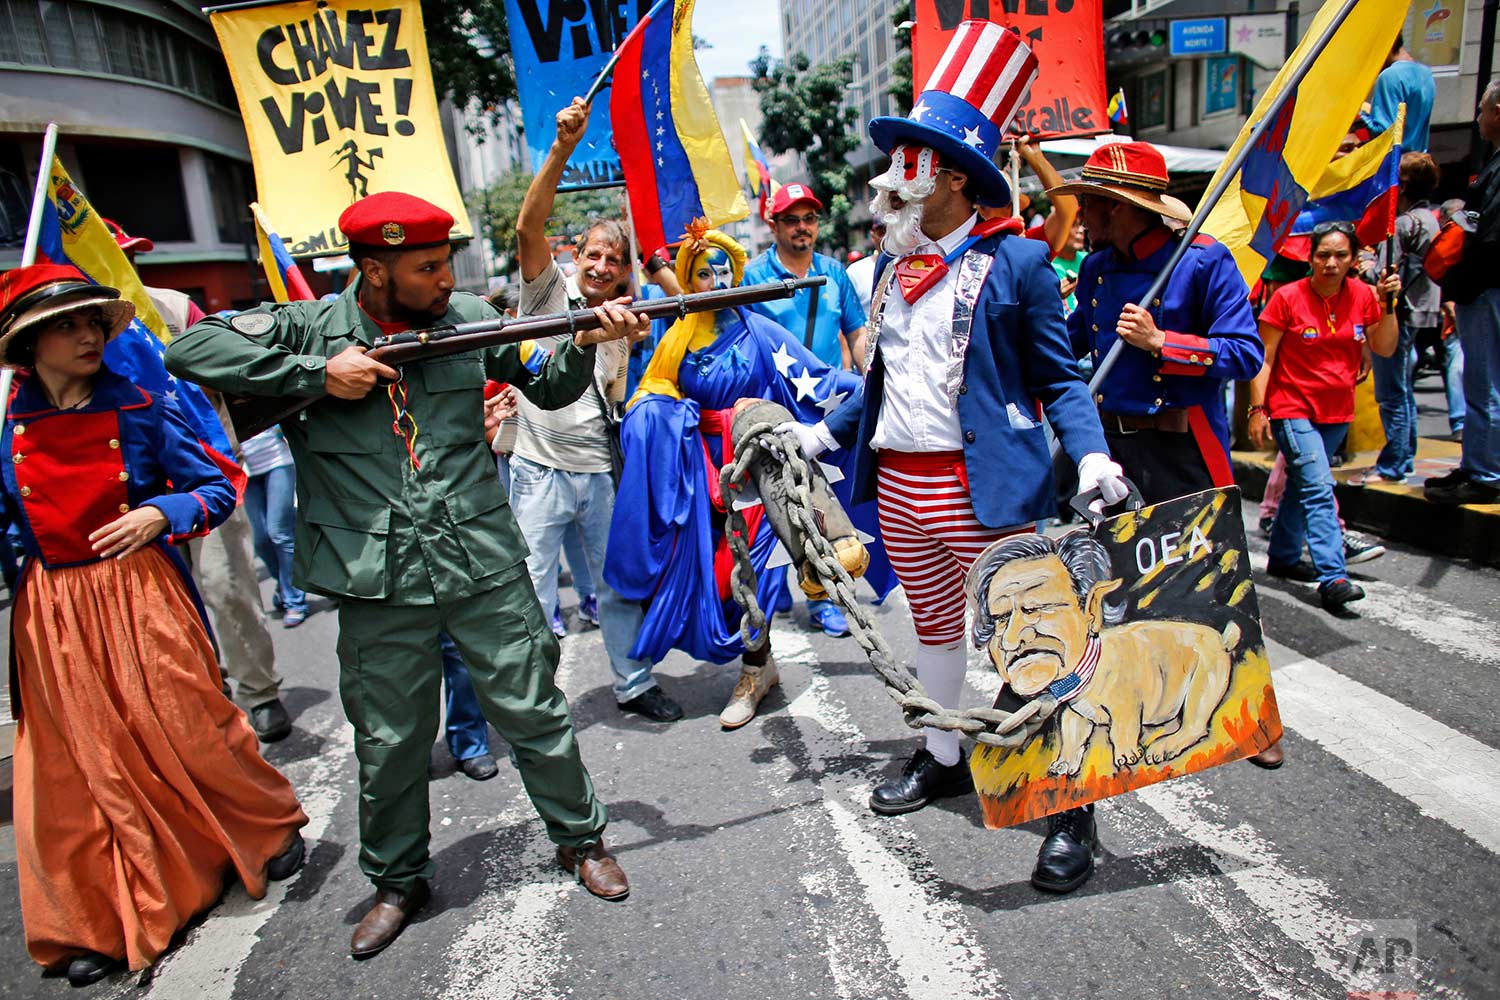  Government supporters perform a parody involving a Venezuelan militia member confronting Uncle Sam, symbolizing the U.S. government, during an anti-imperialist march to denounce U.S. President Donald Trump's talk of a "military option" for resolving